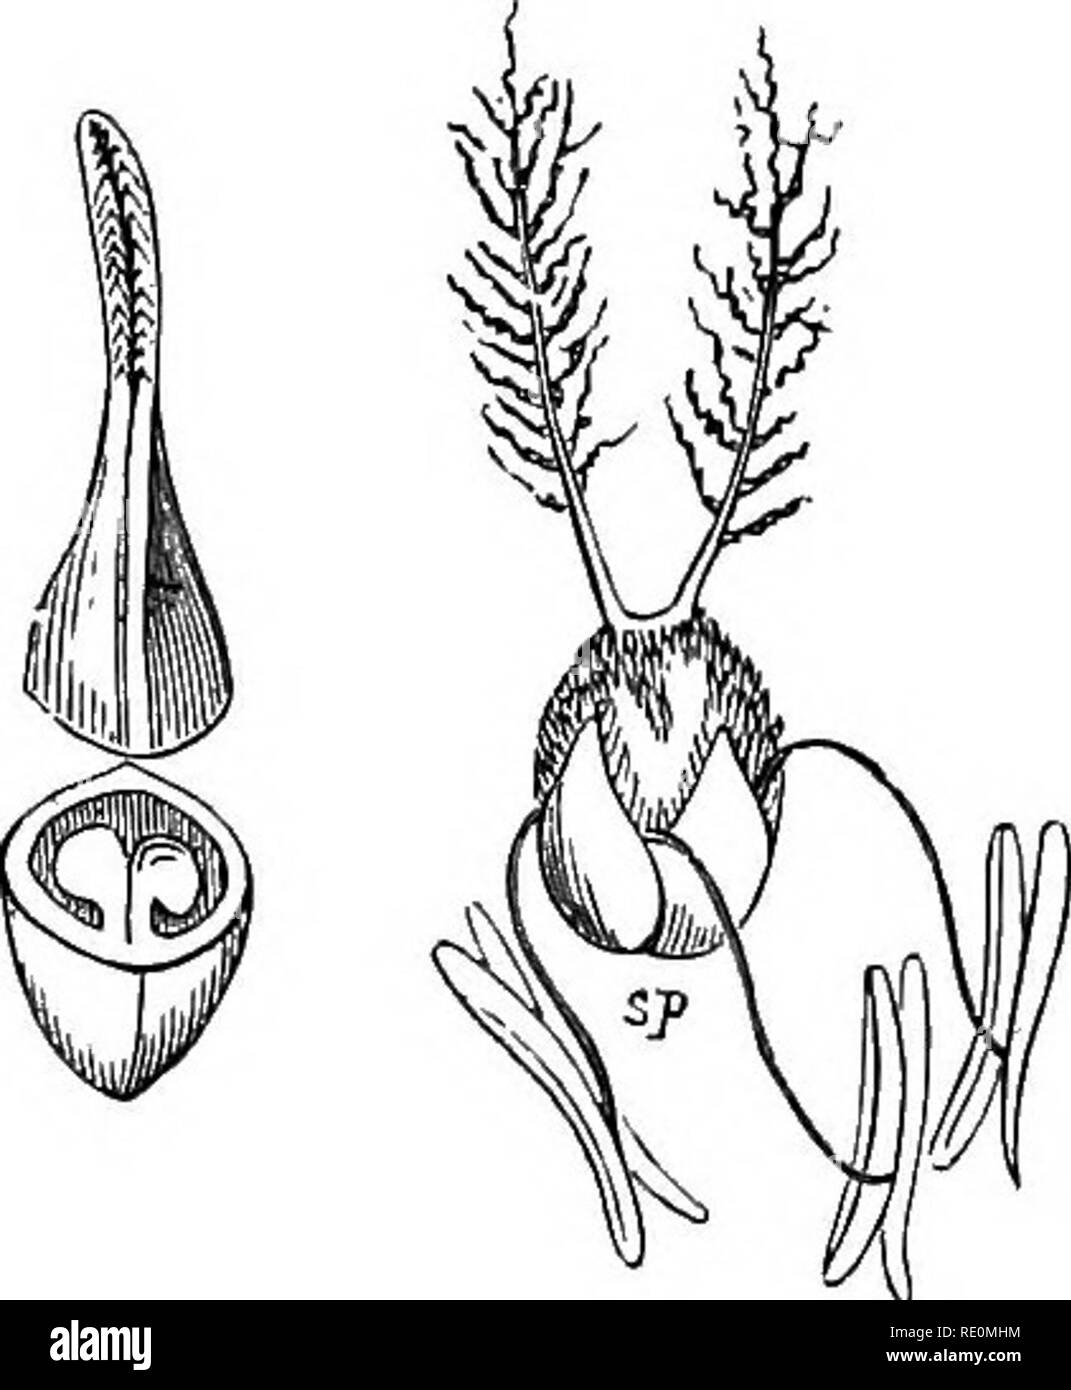 . A manual of botany. Botany. MORPHOLOGY OF REPRODUCTIVE ORGANS 189 monooarpellary ovary has two sutures, one which corresponds to the union of the margins of the lamina of the carpellary leaf, and is turned towards the axis of the plant; and another which corresponds to the midrib of the lamina, and is directed to- wards the floral envelopes or the circumference of the flower ; the former is called the ventral (fig. 399, •us), the latter the dorsal (ds) suture. The Pistil.—When the gynoecium is formed of but one carpel, as in the Broom {fig. 396) and Pea (fig. 406), it is, as we Fig. 400. Fig Stock Photo